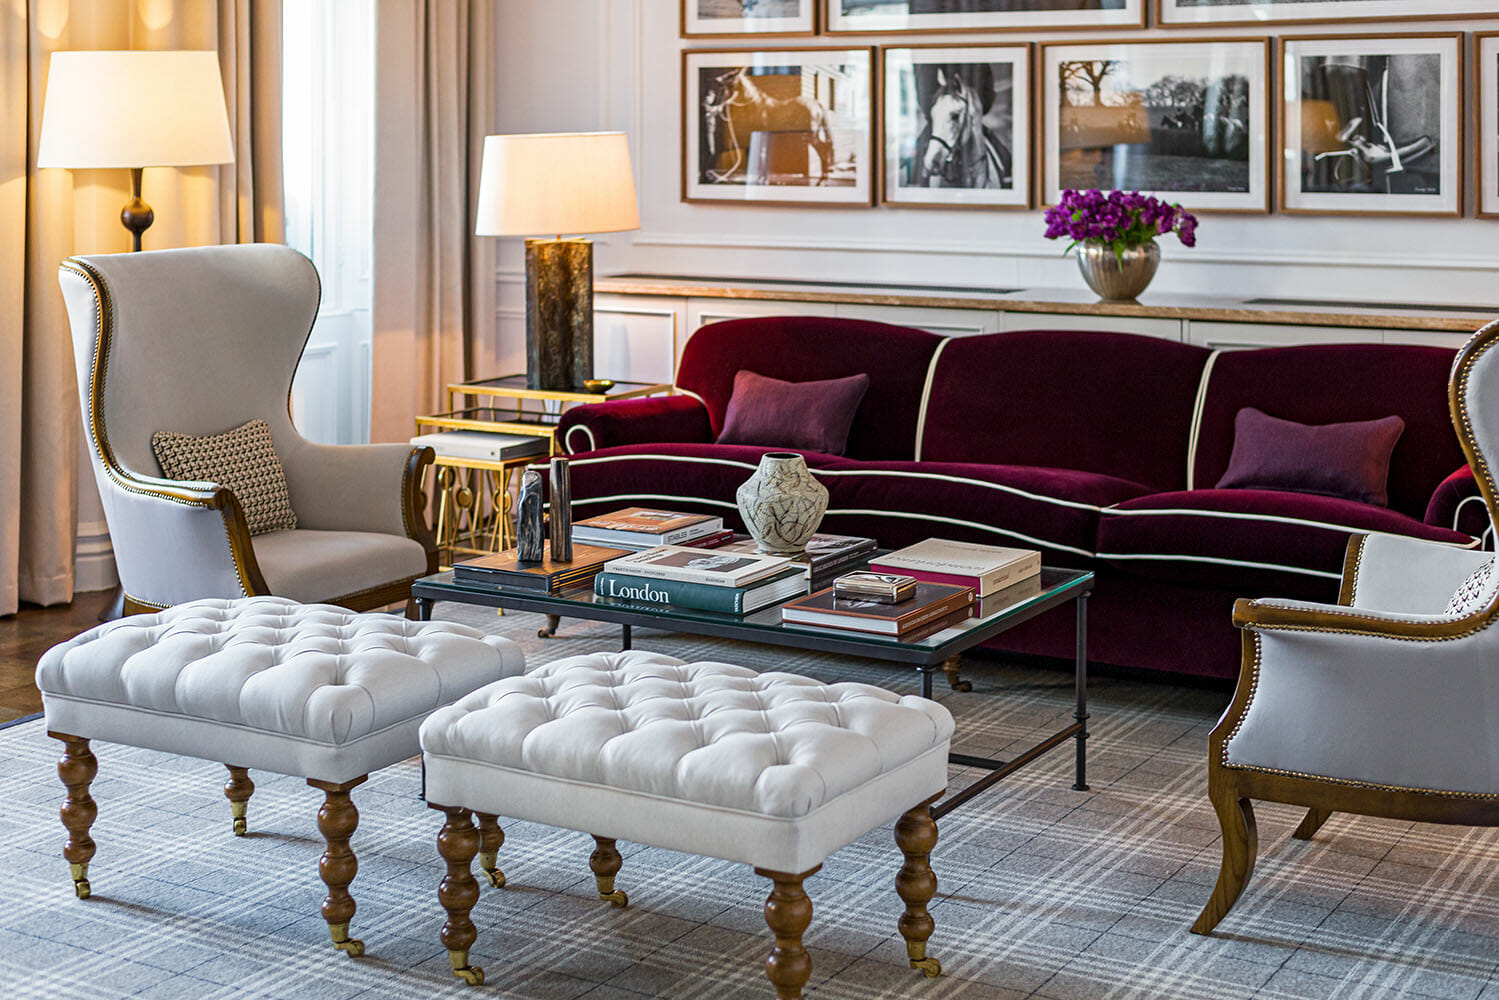 The Bürgenstock Collection Announces its Newest Member, The Adria, a Boutique Hotel in London’s South Kensington